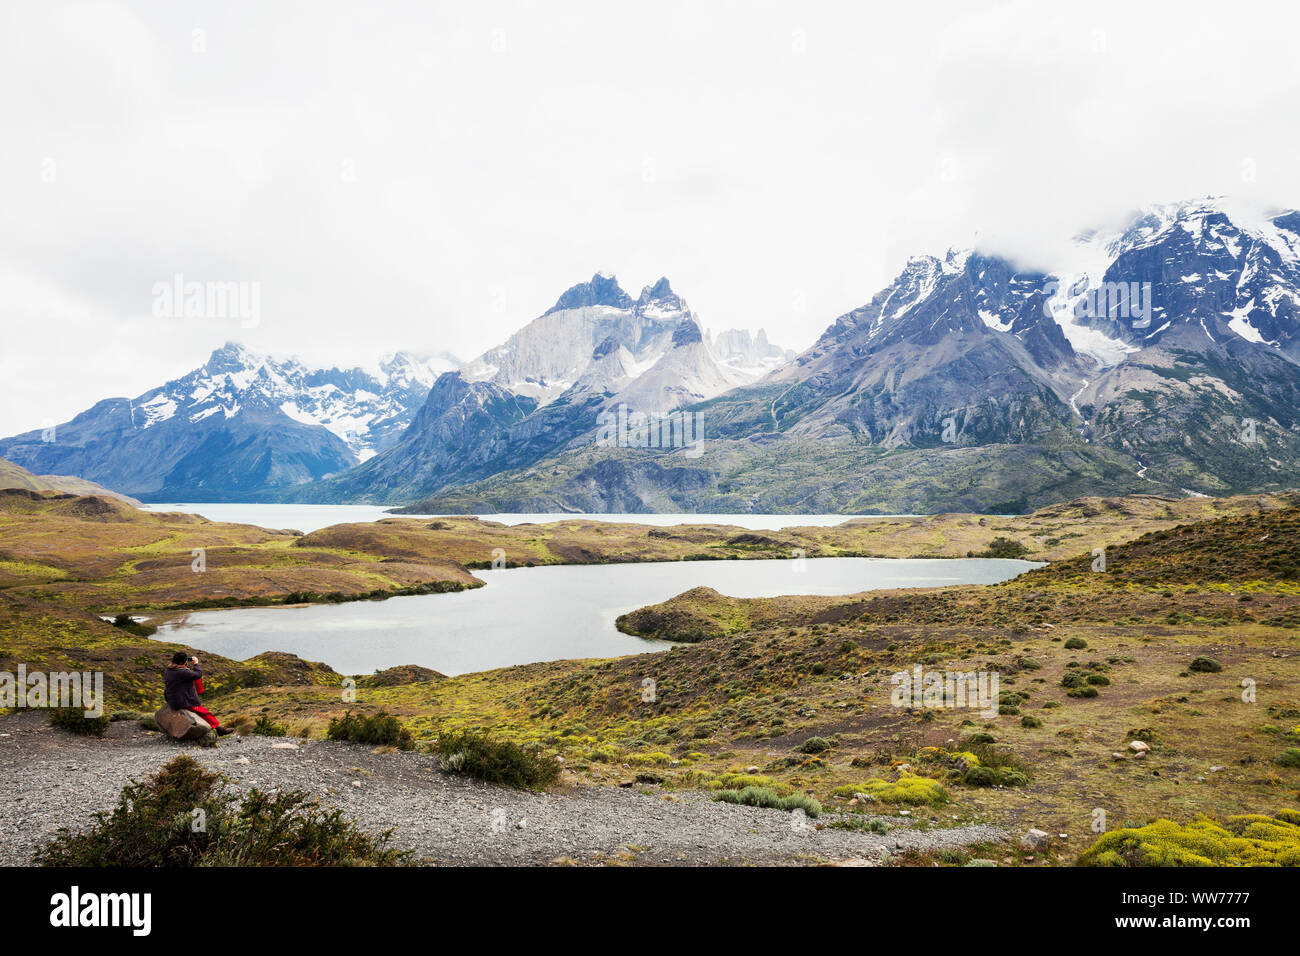 Chile, Patagonia, Torres del Paine National Park Stock Photo